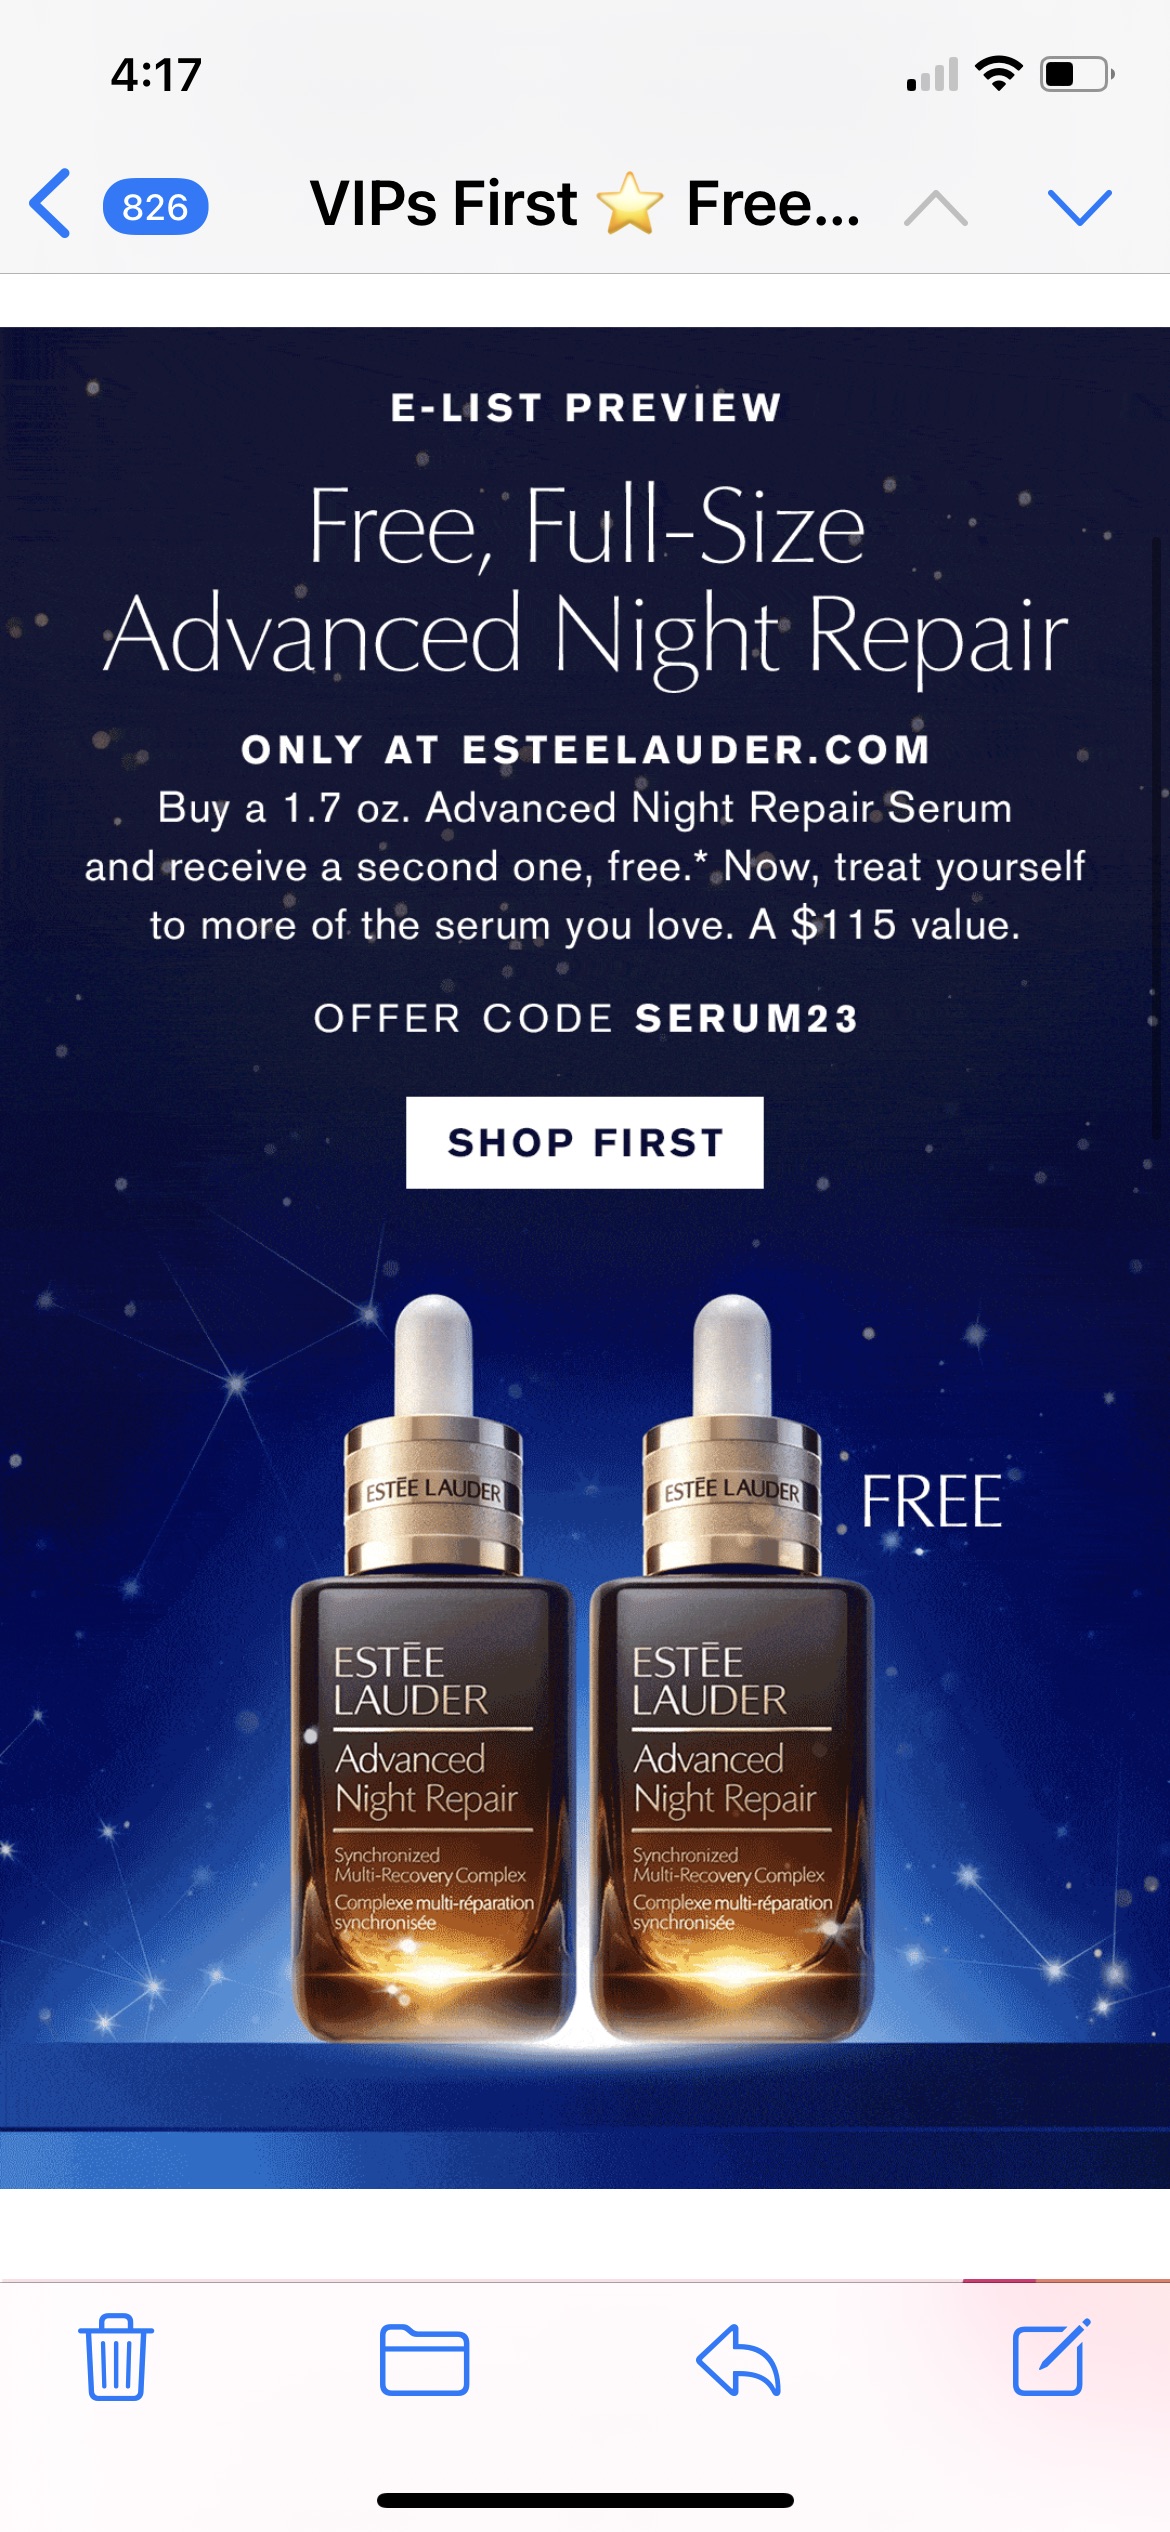 buy a 1.7oz Advanced Night Repair Serum receive second one free，还可叠加首单15%off